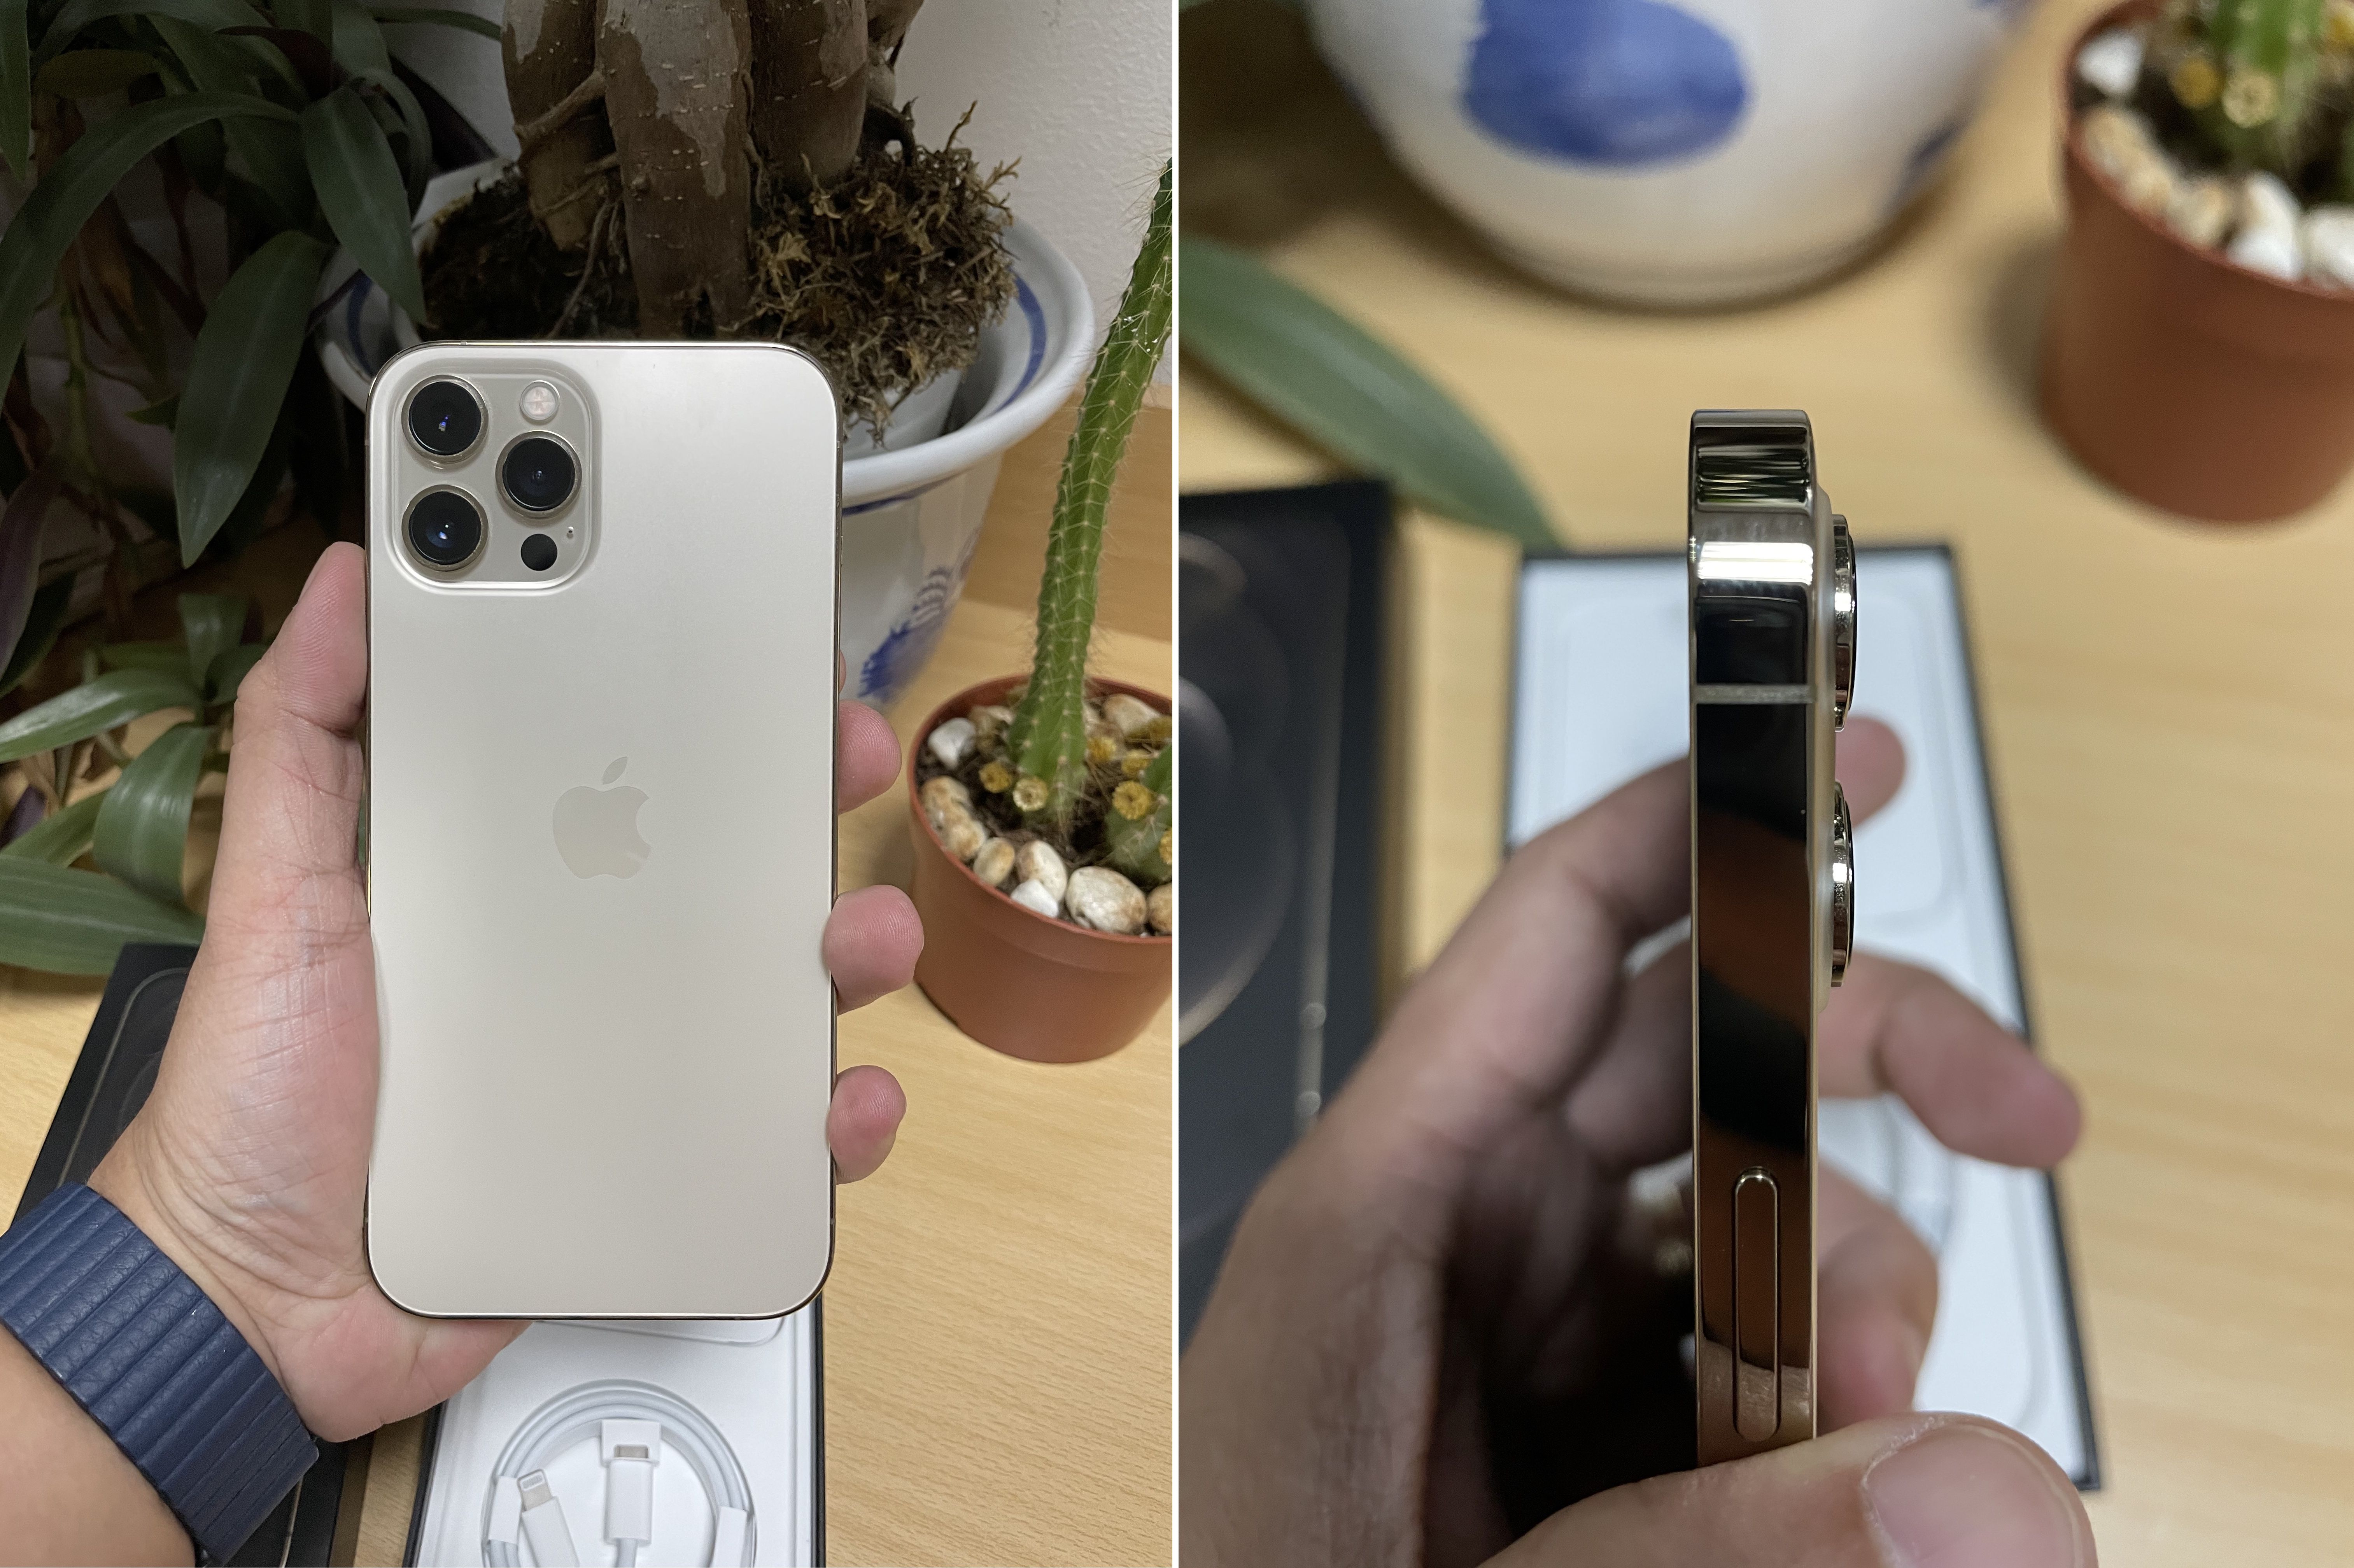 REVIEW: Apple iPhone 12 Pro Max (https://images.alkhaleejtoday.co/assets/jpg/KT26711119.JPG)